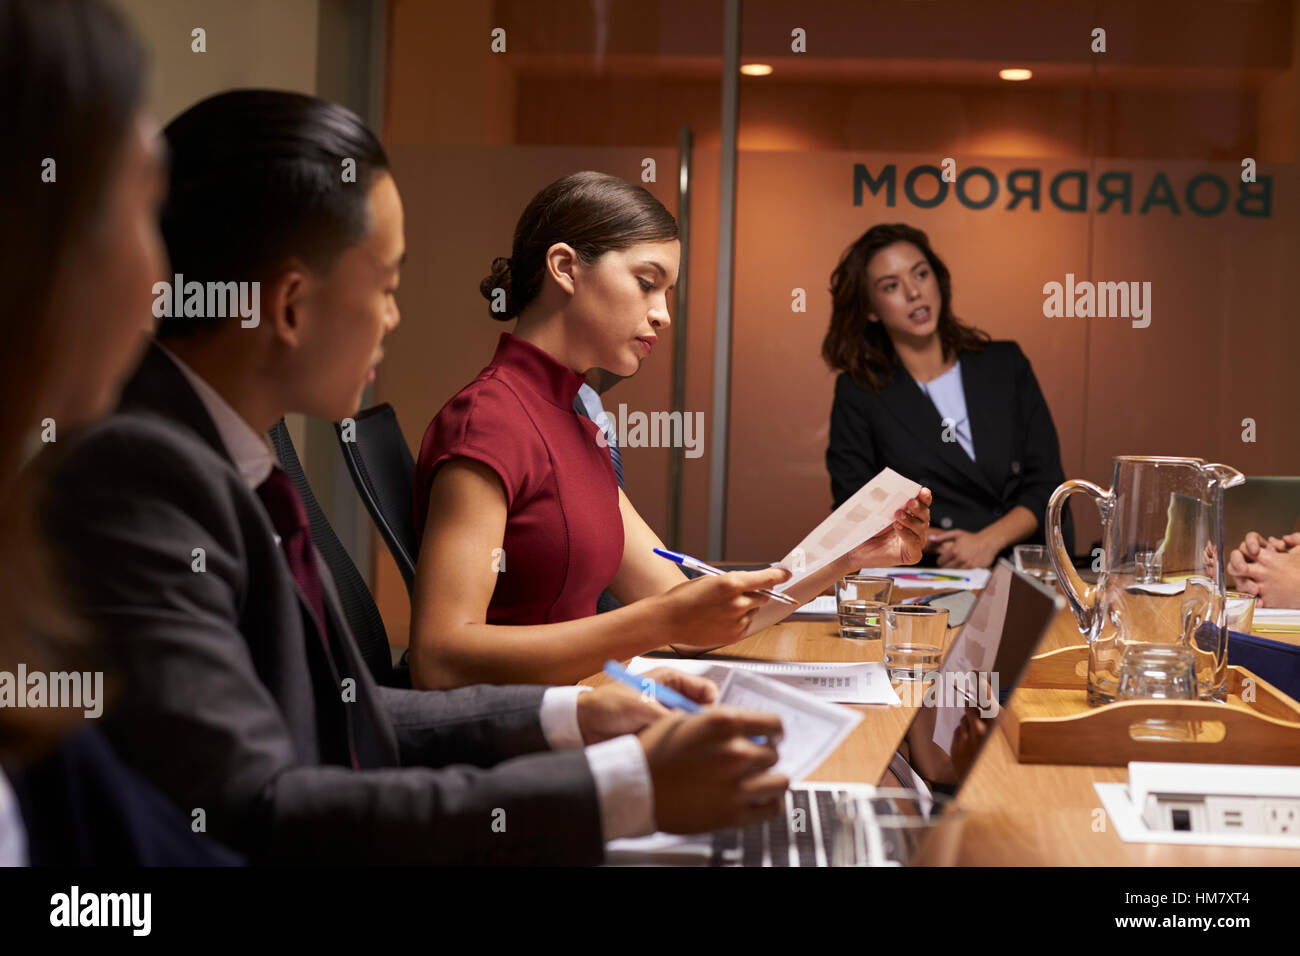 Female boss chairing business meeting in boardroom, close up Stock Photo